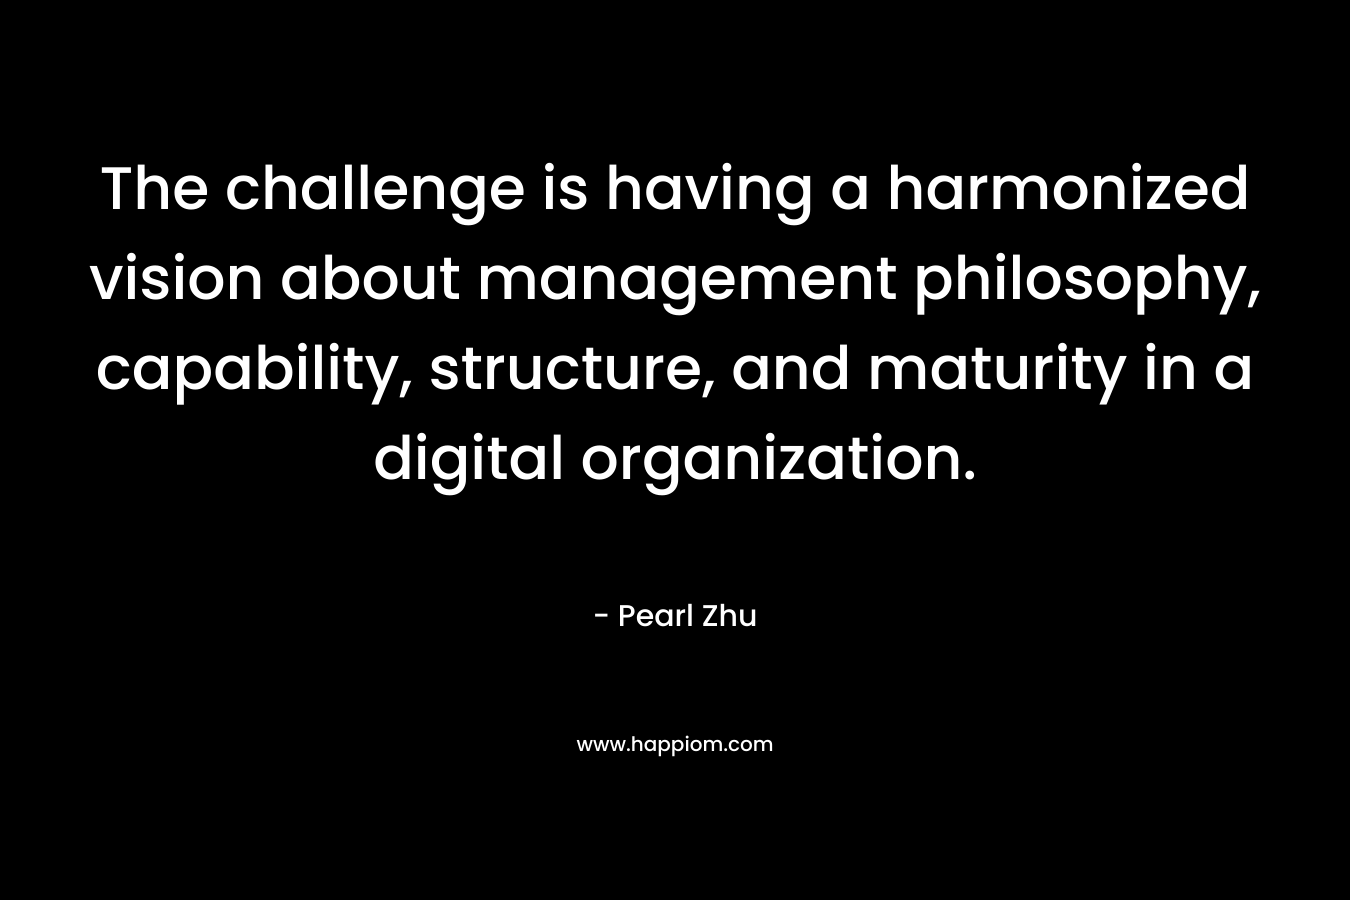 The challenge is having a harmonized vision about management philosophy, capability, structure, and maturity in a digital organization.